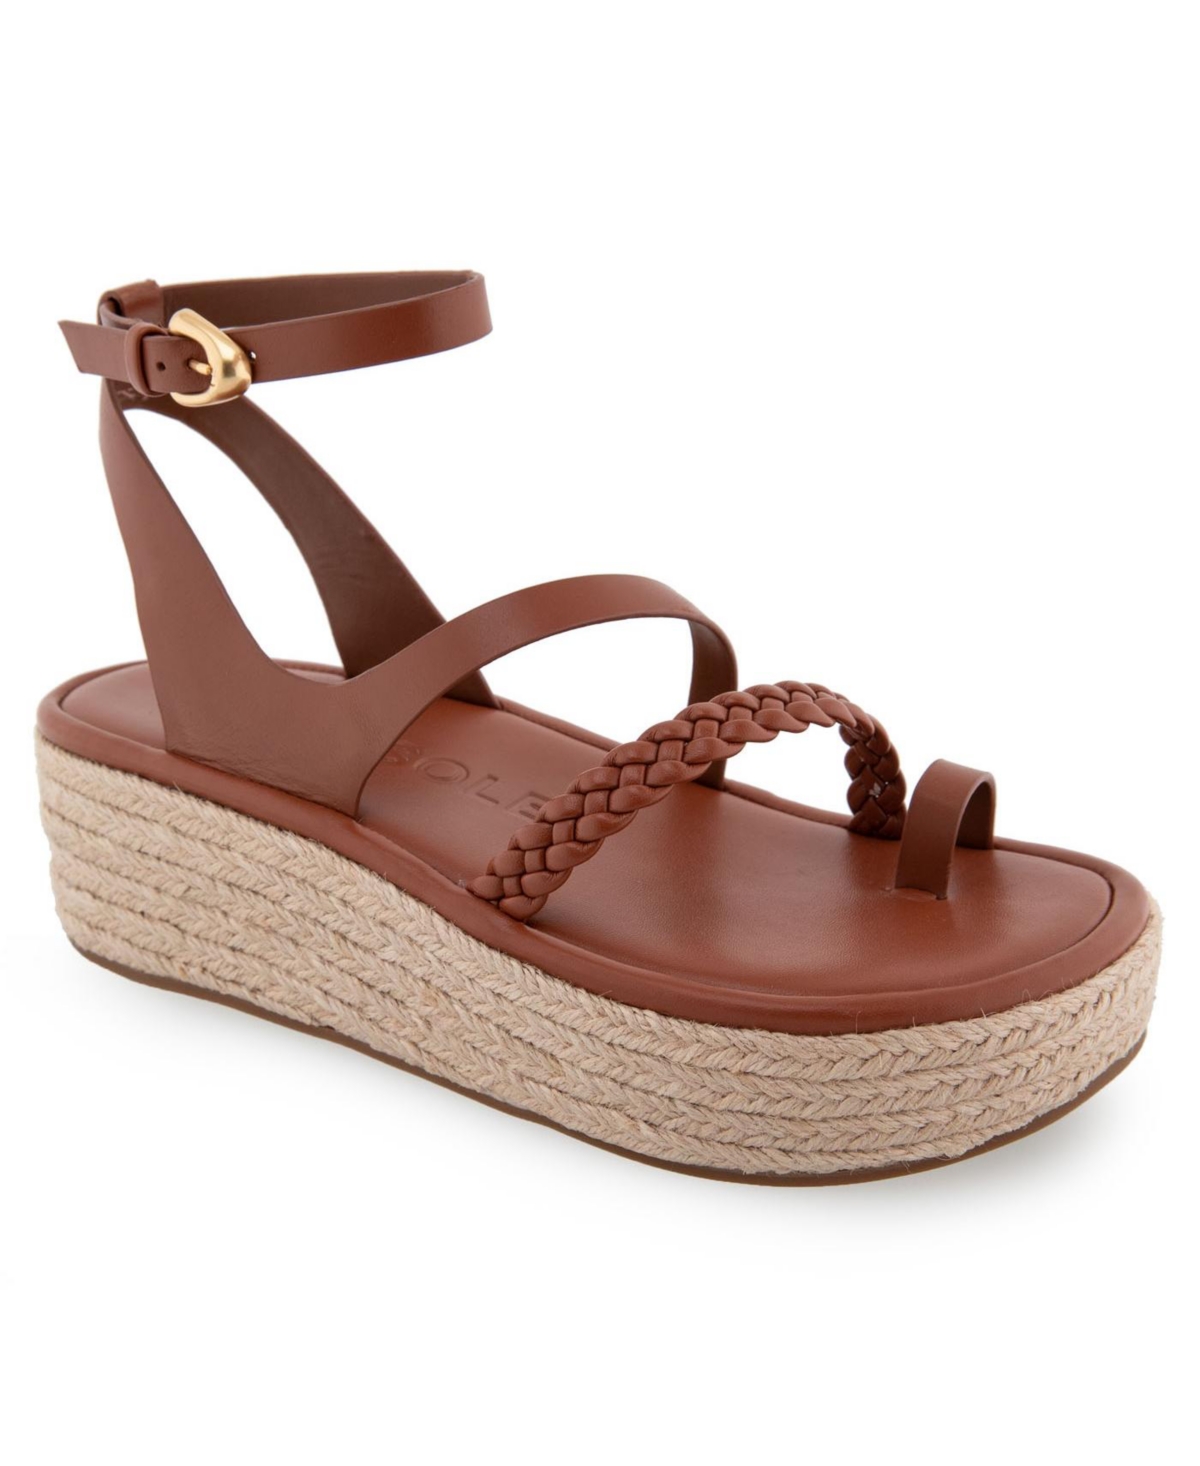 Women's Dolly Wedge Sandals - Soft Gold Patent Polyurethane